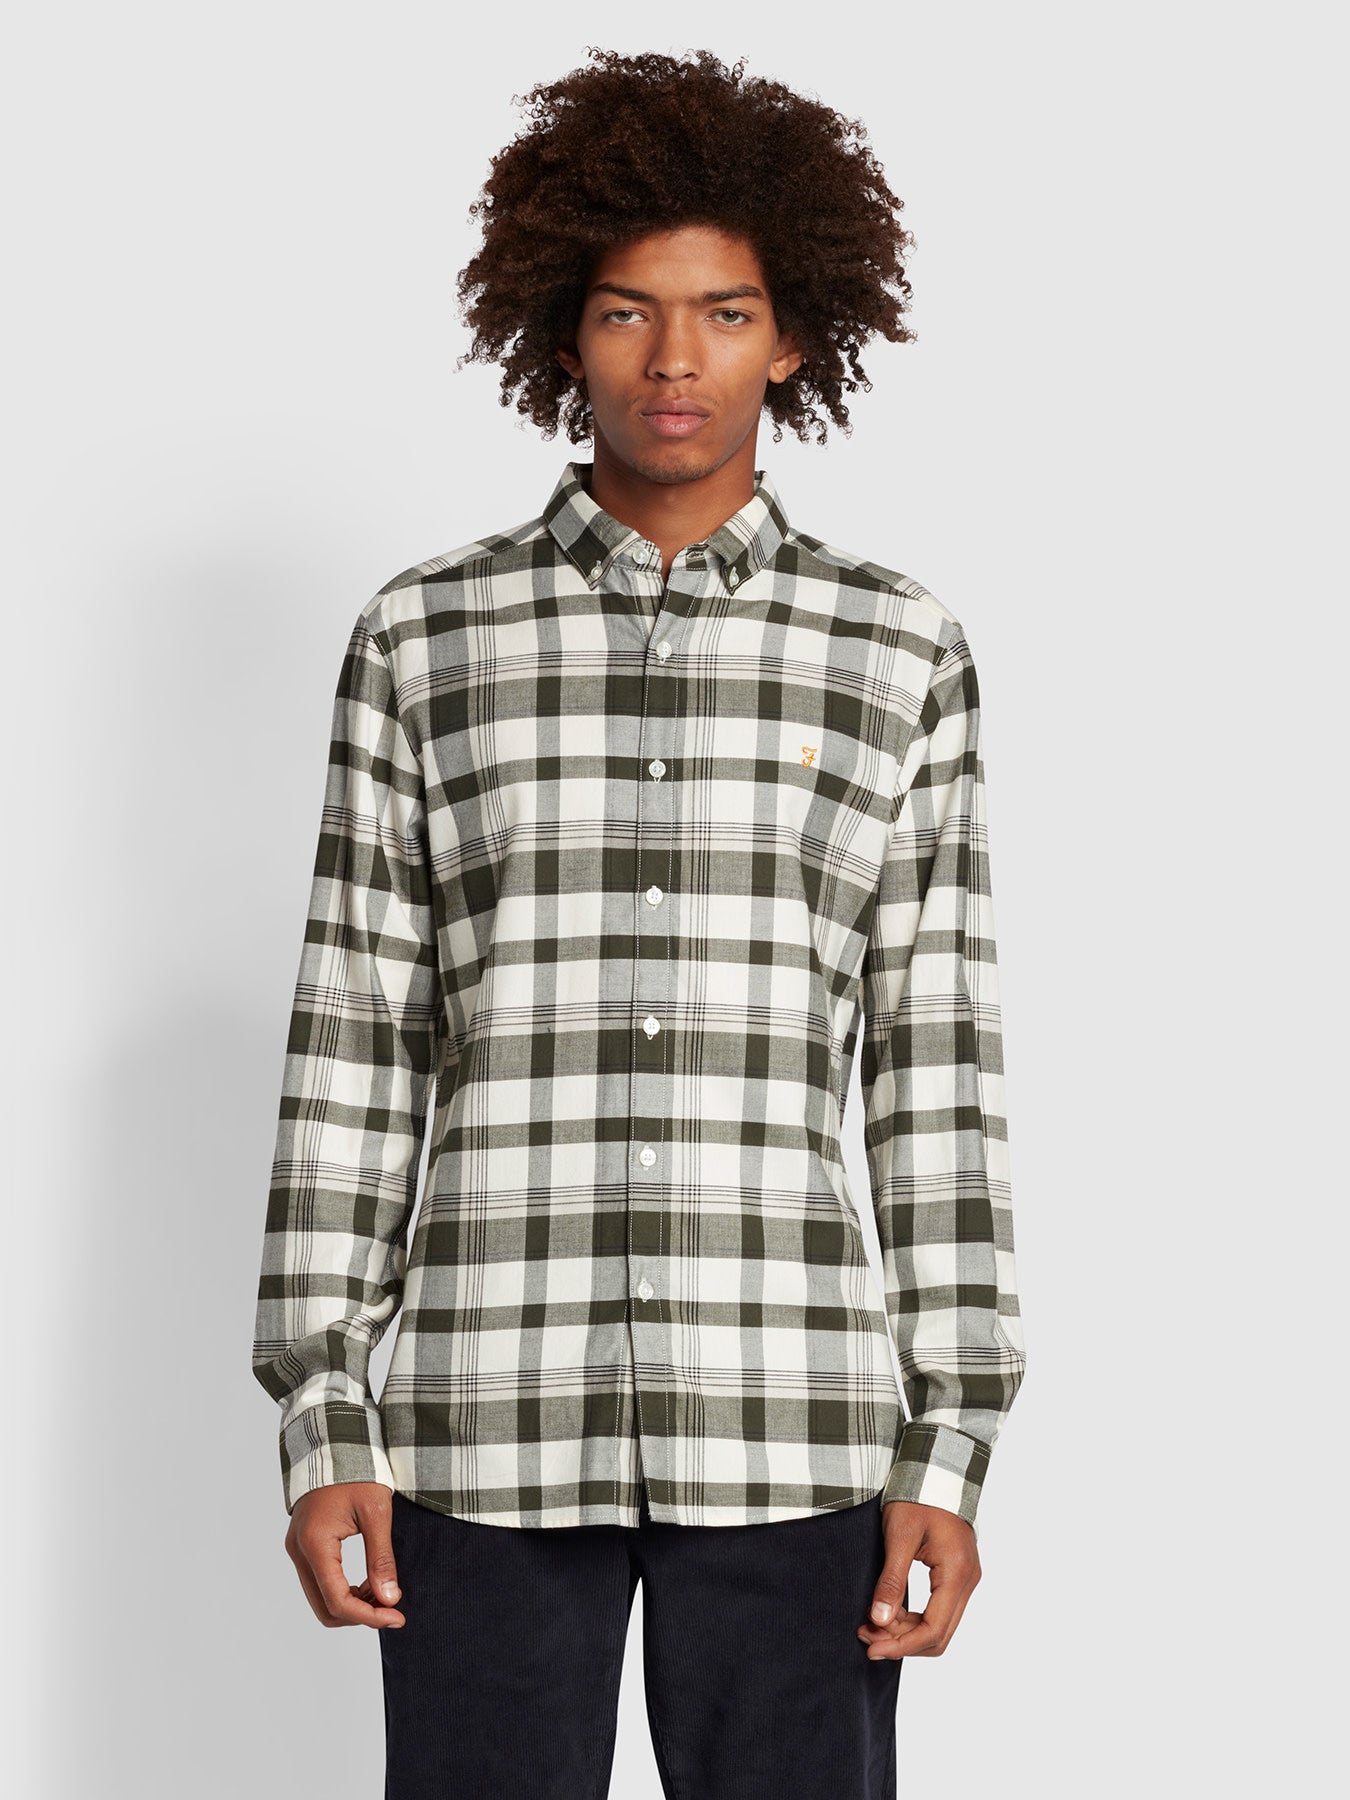 View Jean Slim Fit Check Long Sleeve Shirt In Evergreen information